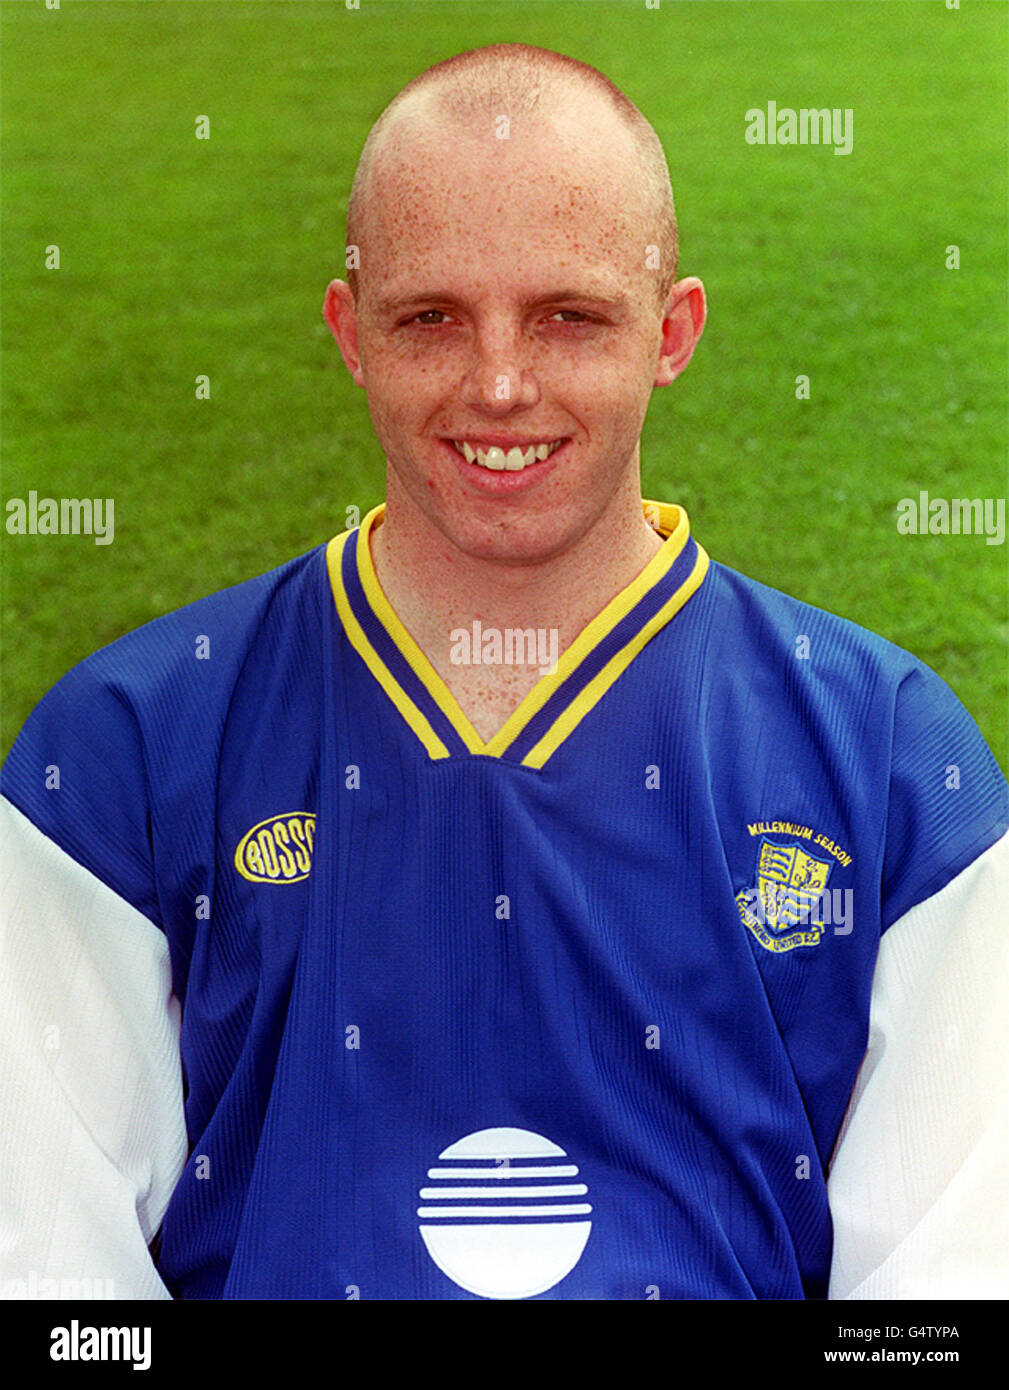 Southend United/Campbell. Neil Campbell, who plays for Southend United FC. Stock Photo